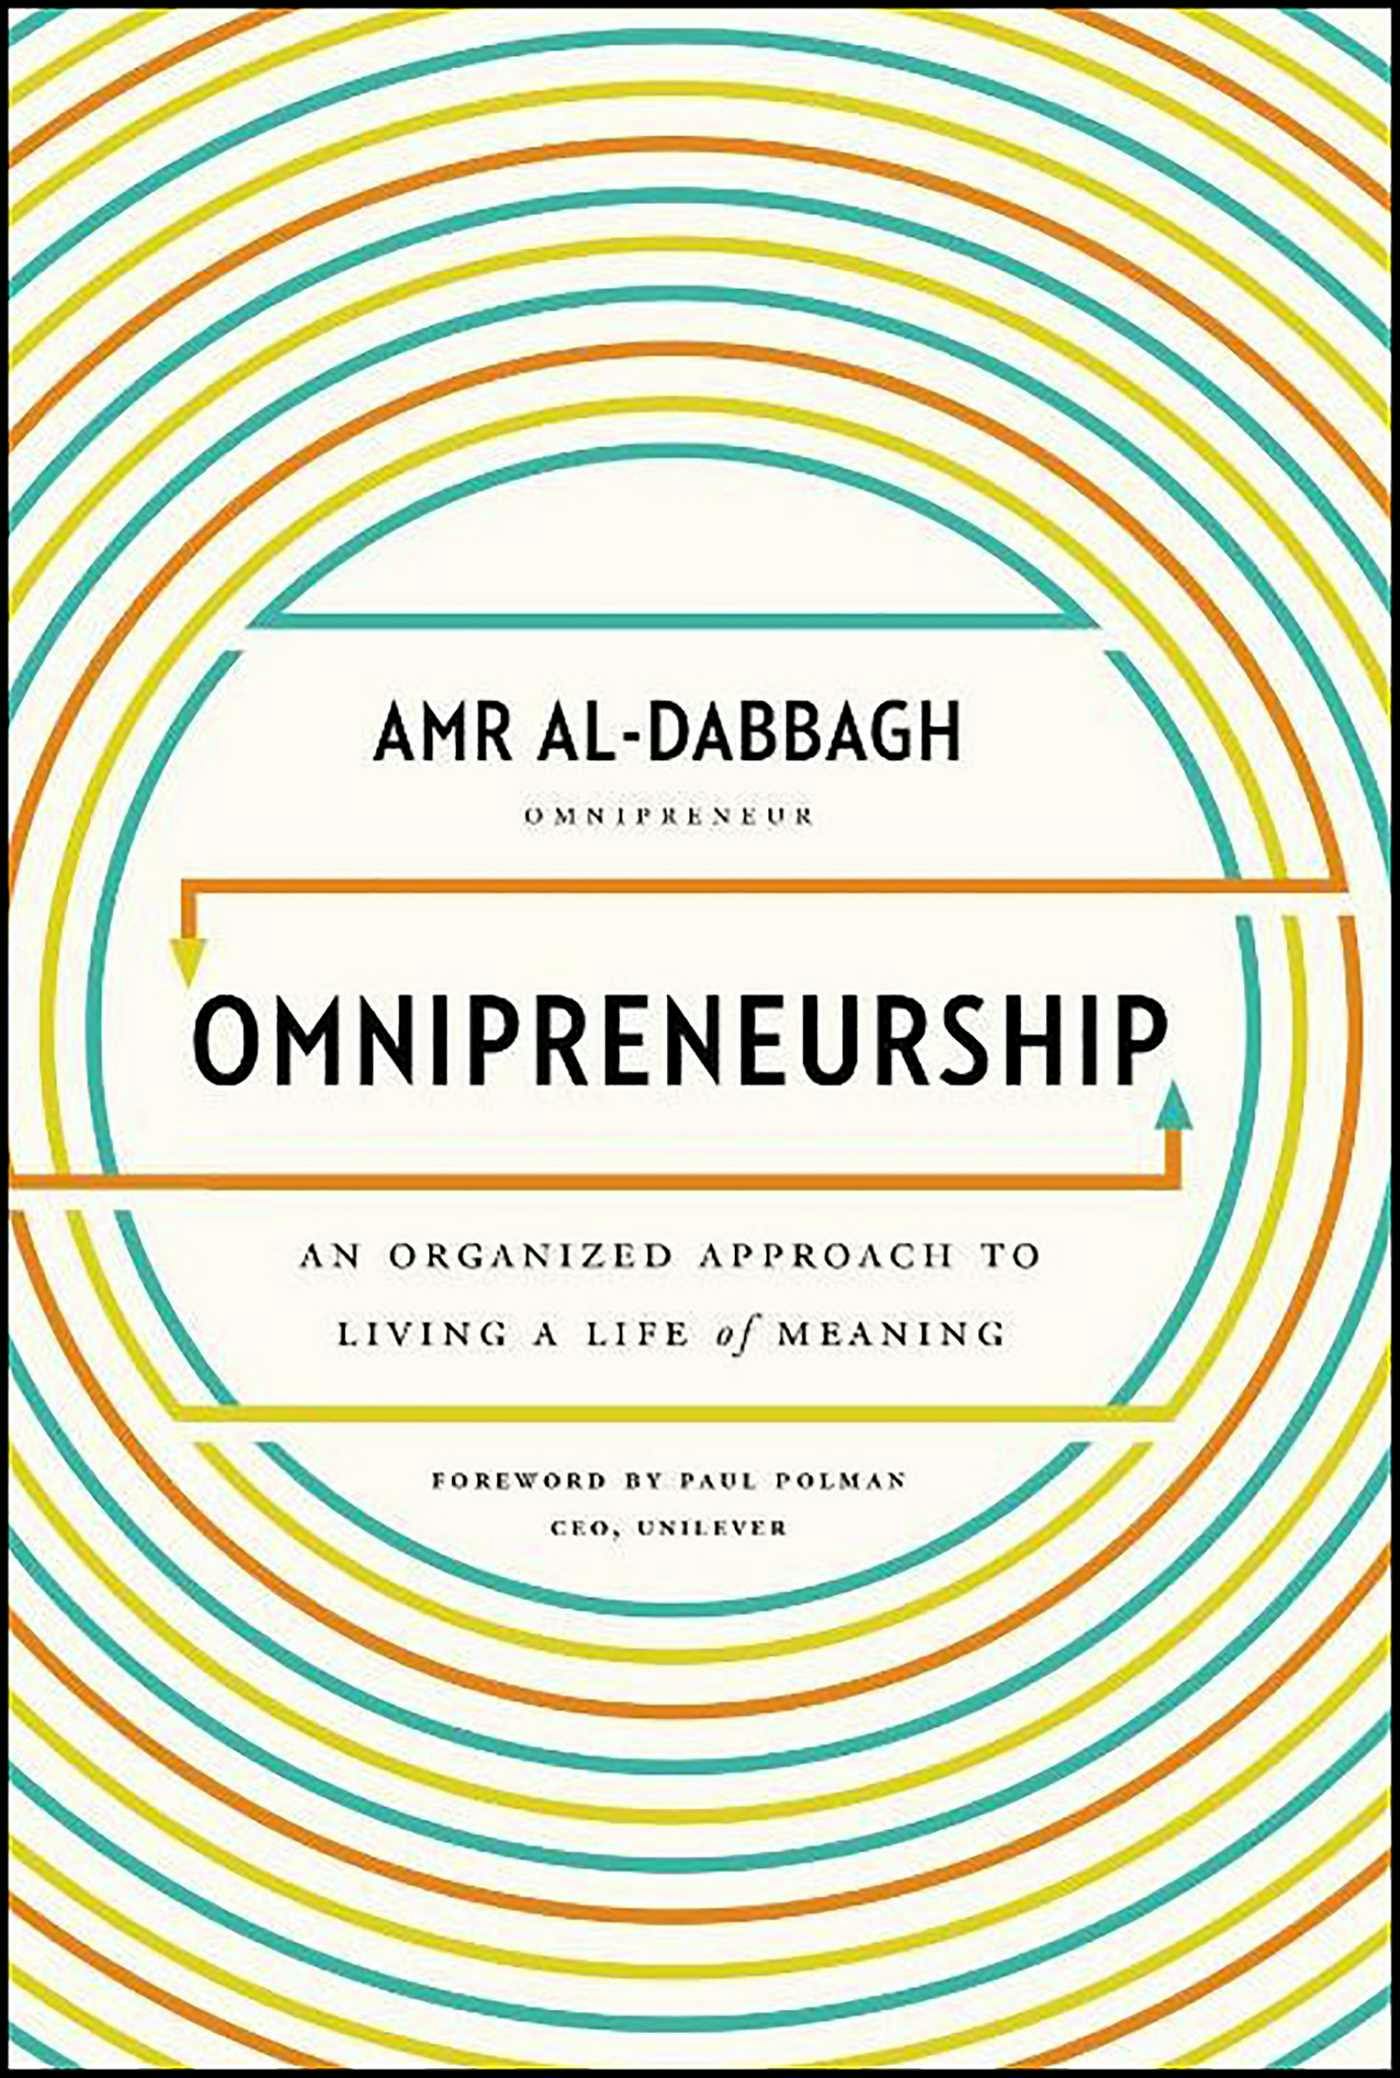 Omnipreneurship: An Organized Approach to Living A Life of Meaning - Amr Al-Dabbagh